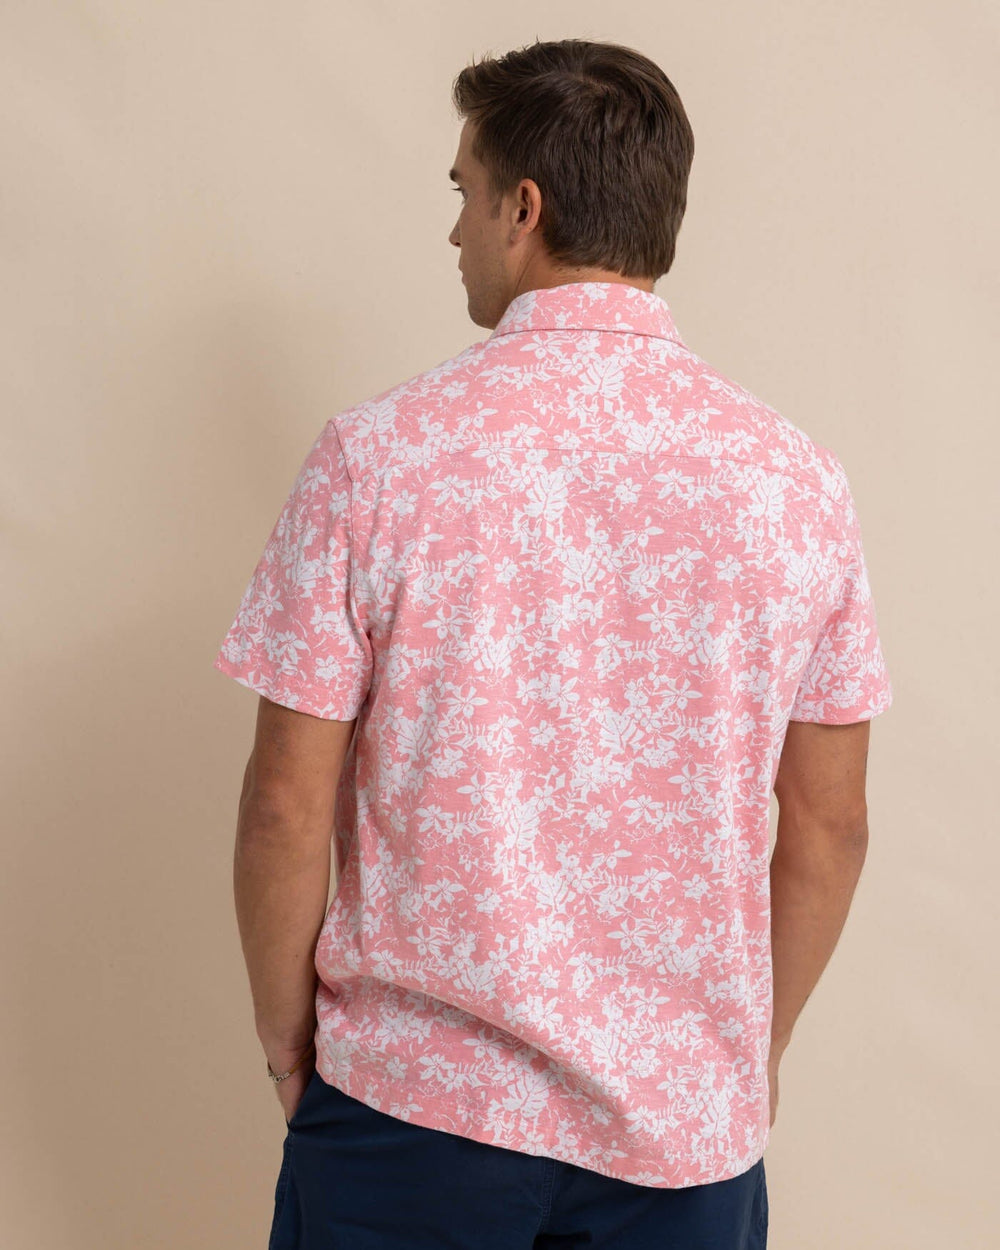 The back view of the Southern Tide Beachcast Island Blooms Knit Short Sleeve Sport Shirt by Southern Tide - Geranium Pink